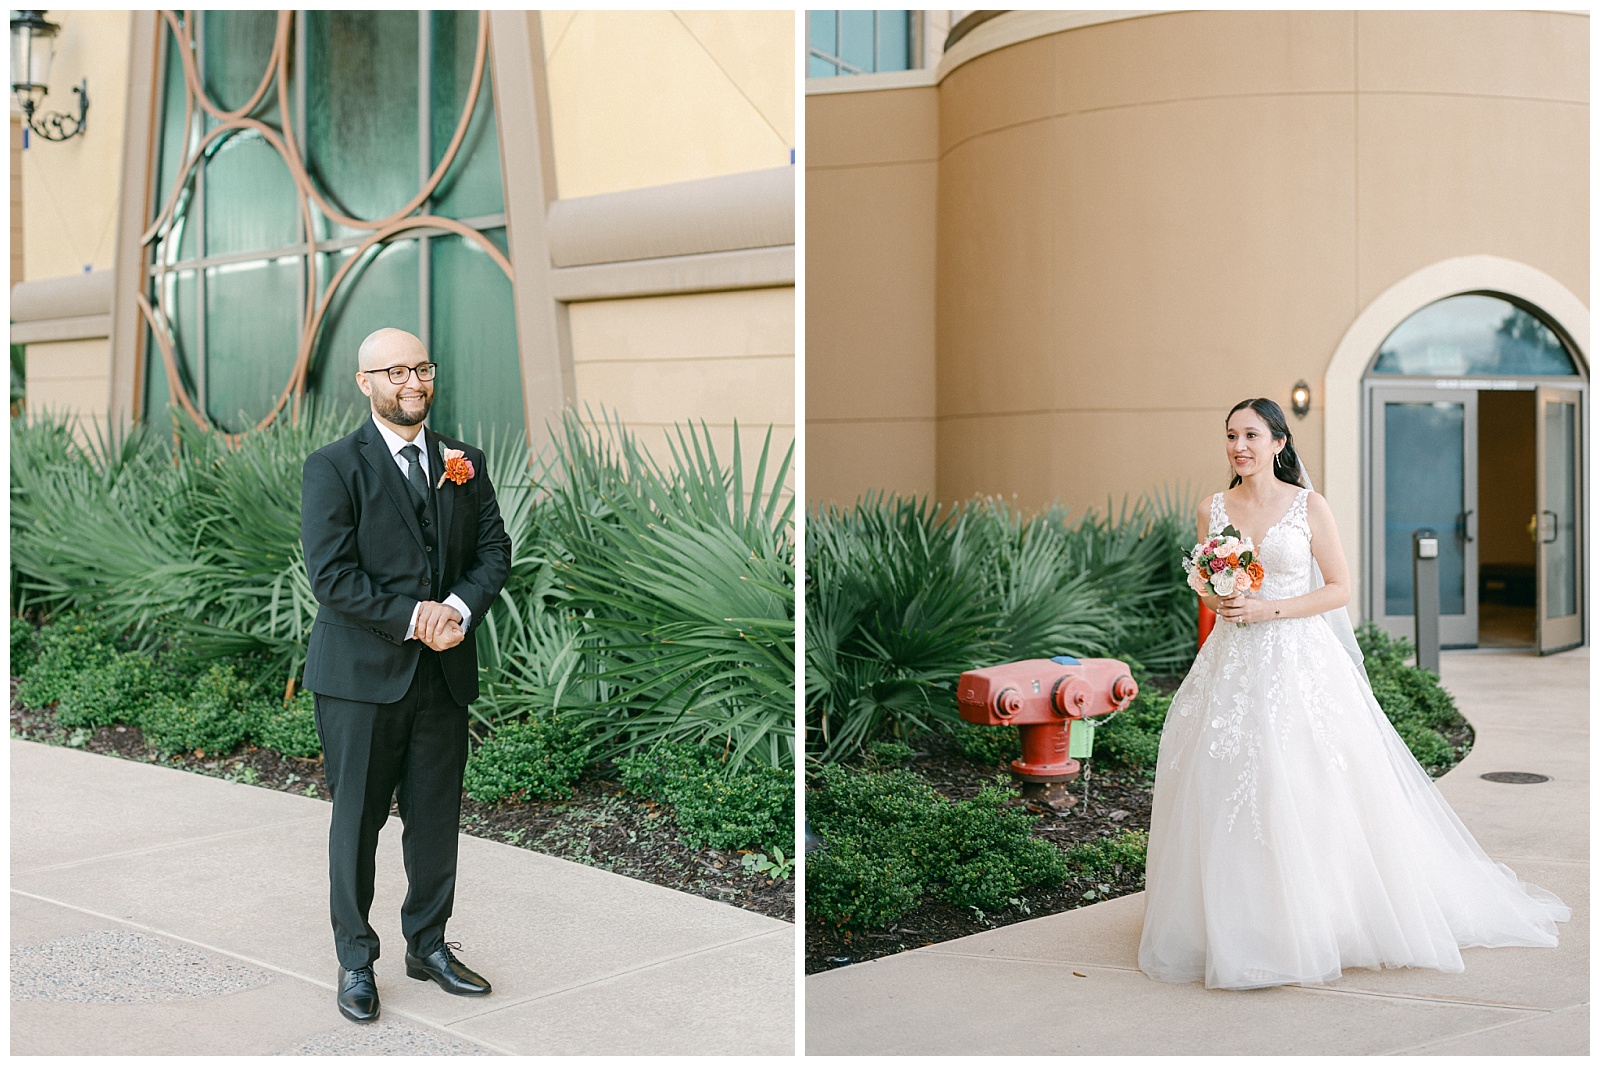 Left: Groom seeing his bride for the first time on their wedding day.
Right: Bride seeing her groom for the first time on their wedding day.
By Elizabeth Kane Photography at Disney's Riviera Resort in Orlando Florida